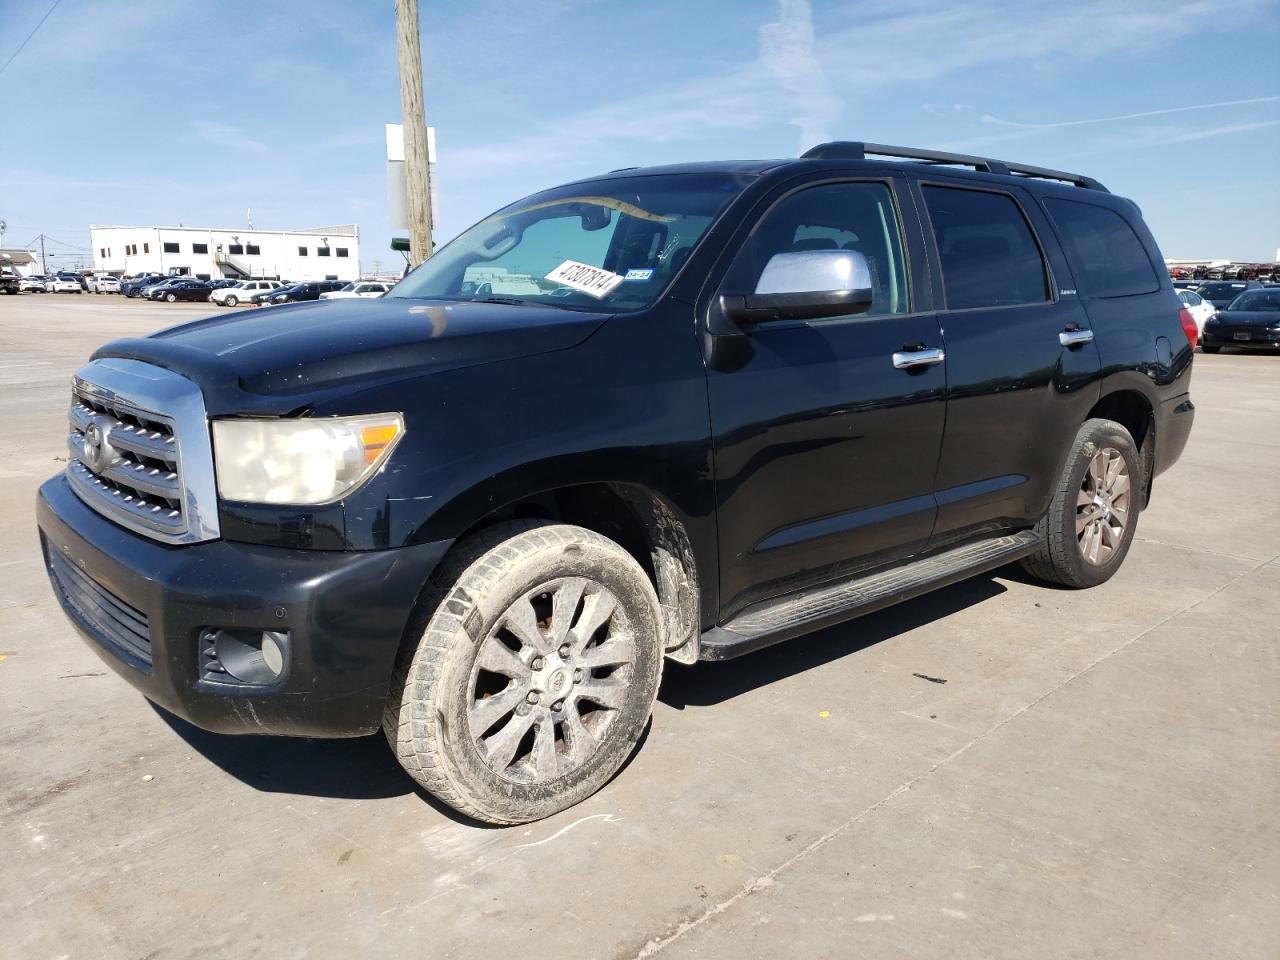 vin: 5TDKY5G1XBS036016 5TDKY5G1XBS036016 2011 toyota sequoia 5700 for Sale in 75051 2410, Tx - Dallas, Grand Prairie, USA